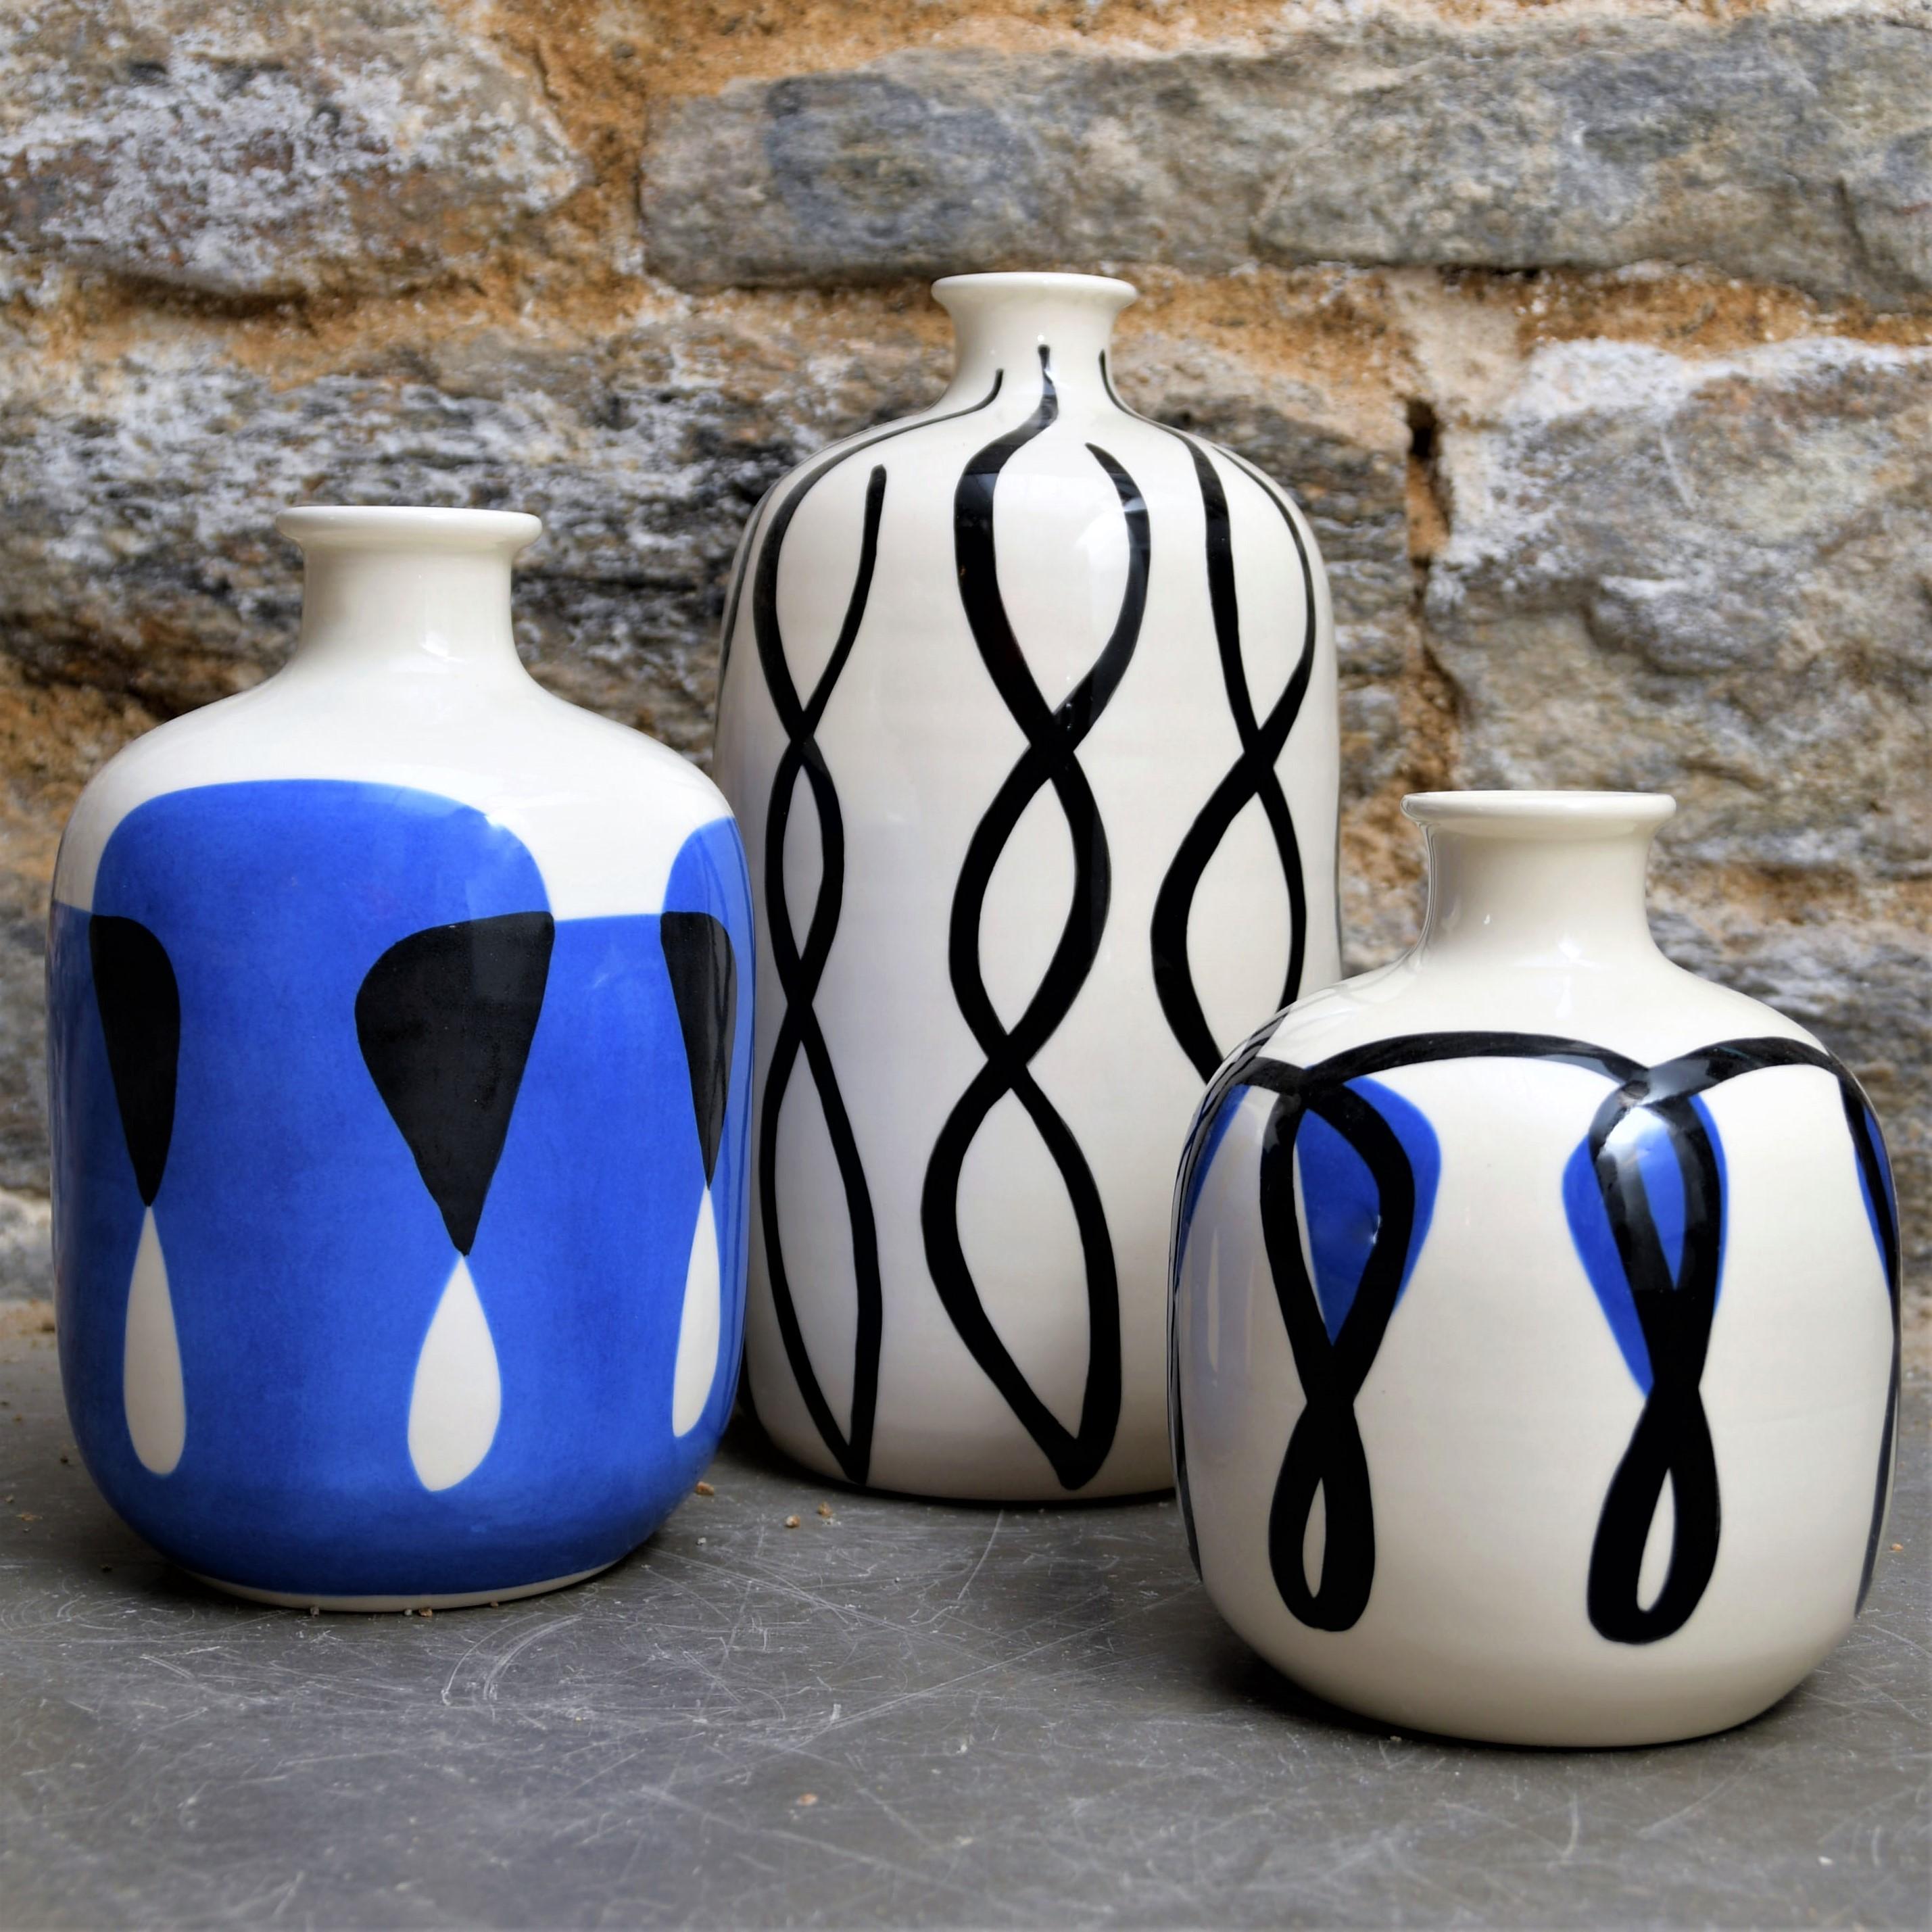 Set of 3 hand-turned ceramic vases by artist Valérie Le Roux. These pieces are hand painted and glazed, decorated with graphic nautical motifs : kelp and sea fronds in cobalt blue and black. This Minimalist design never goes out of style.

Valérie